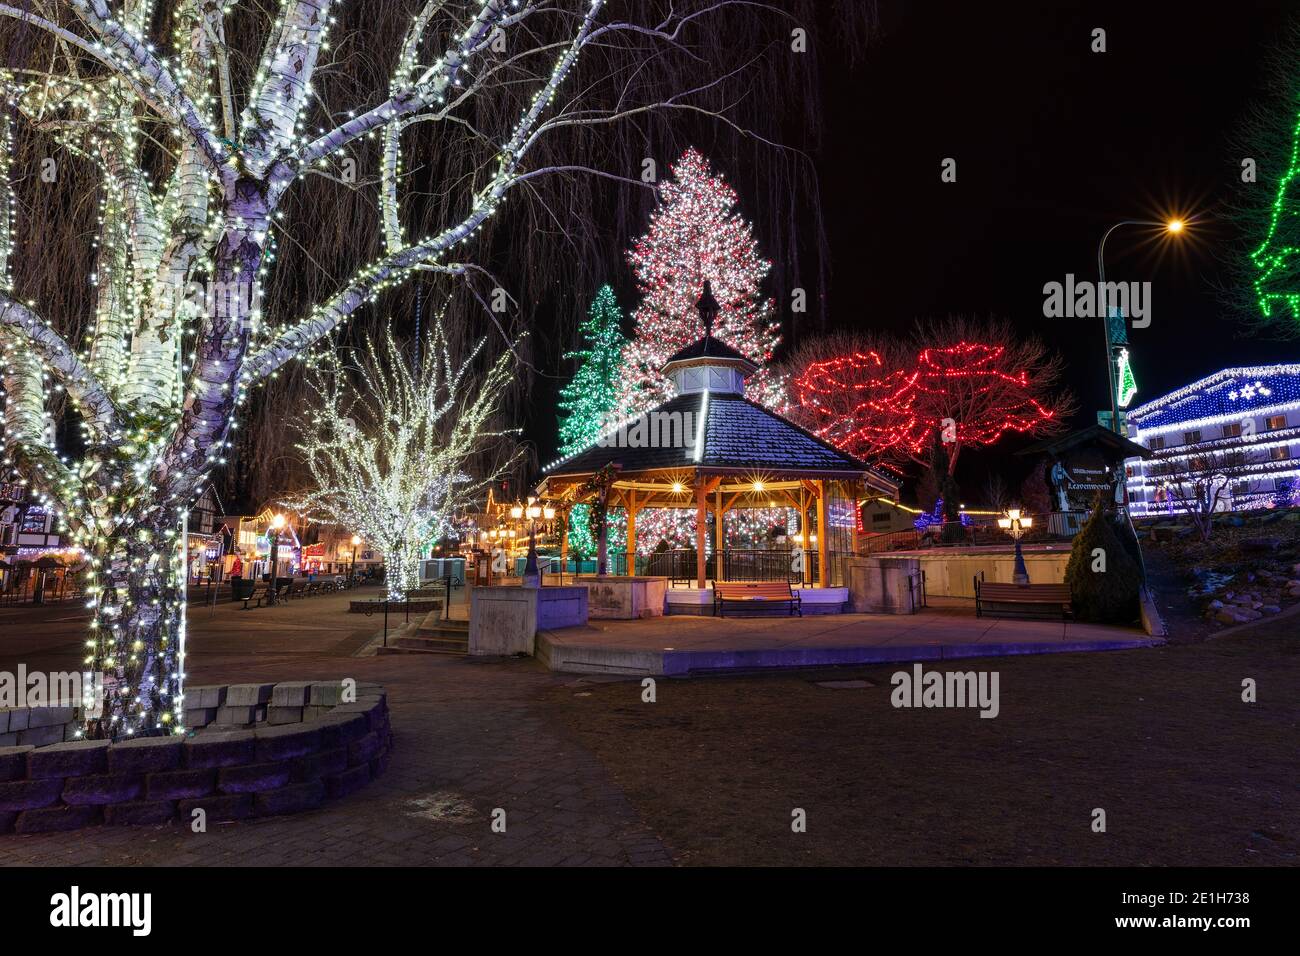 Town square with Christmas lights in Leavenworth, Washington Stock Photo